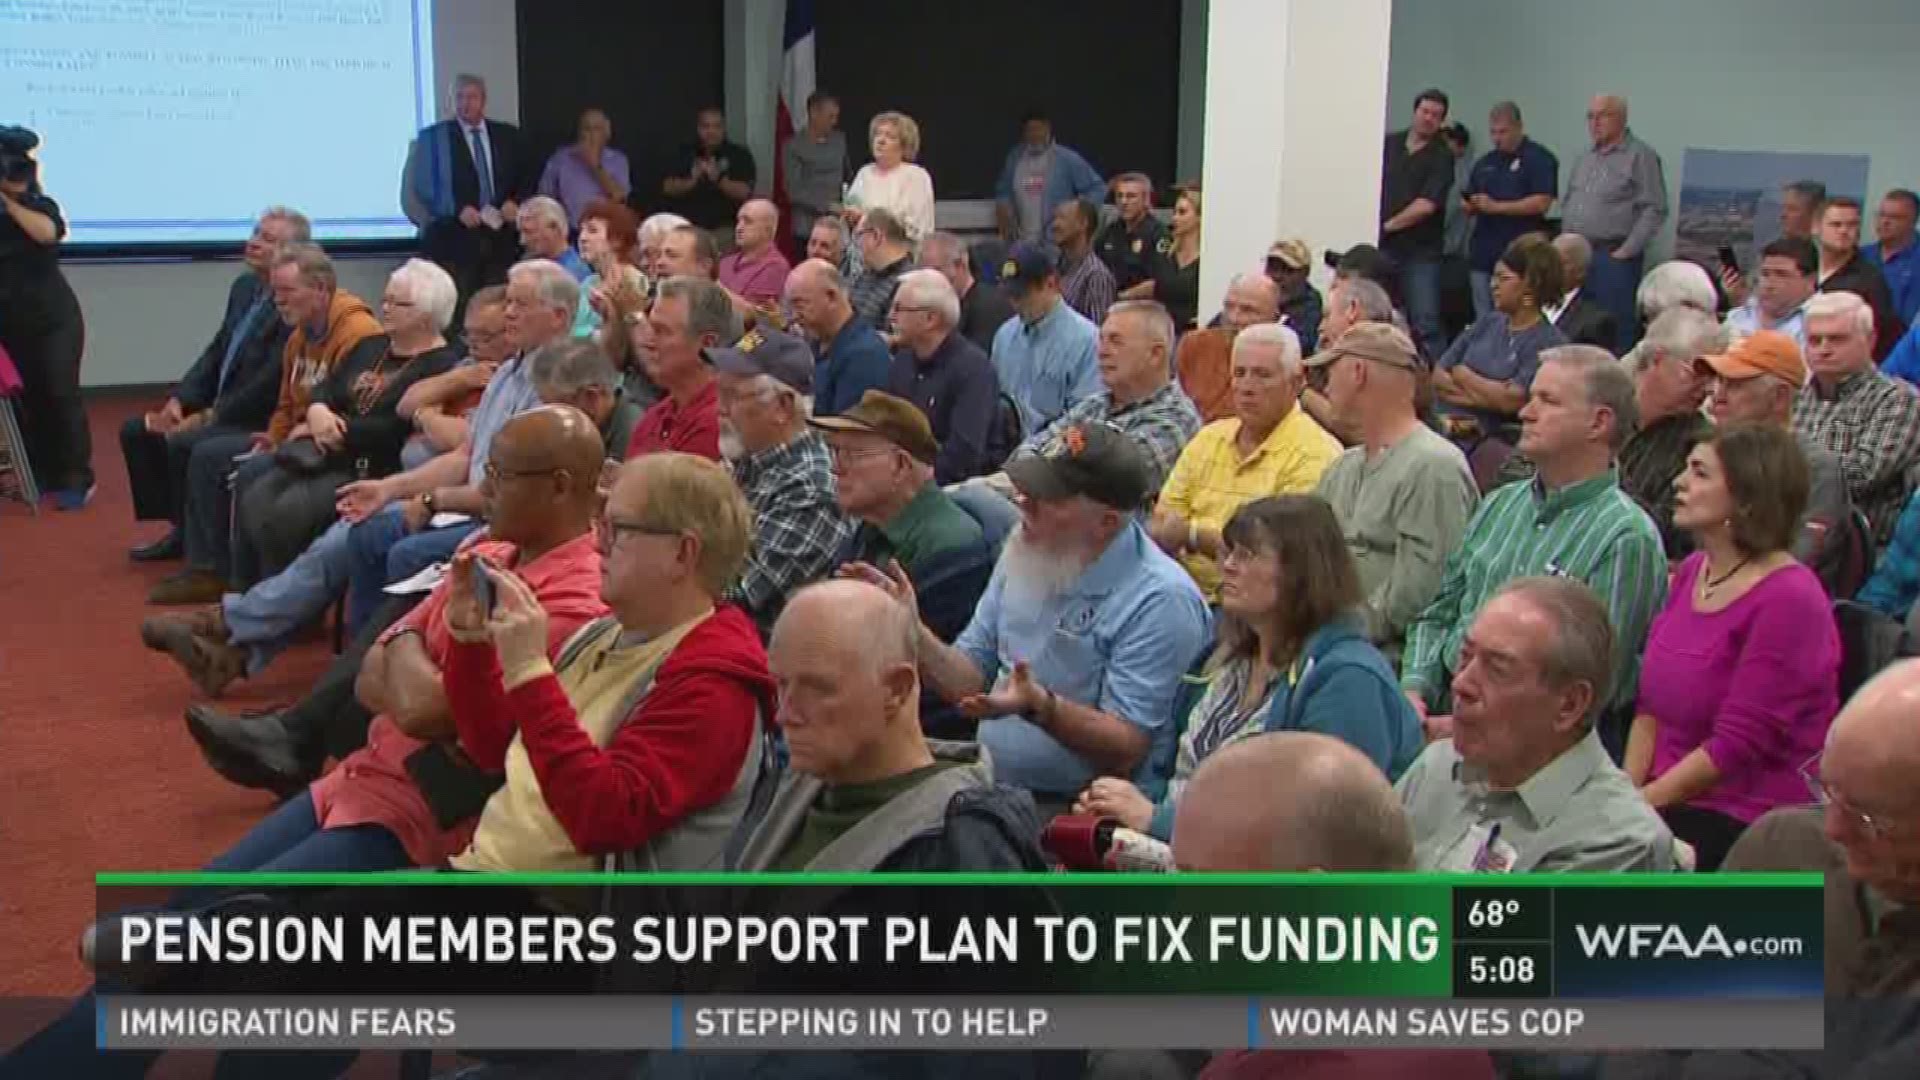 Pension Members Support Plan To Fix Funding